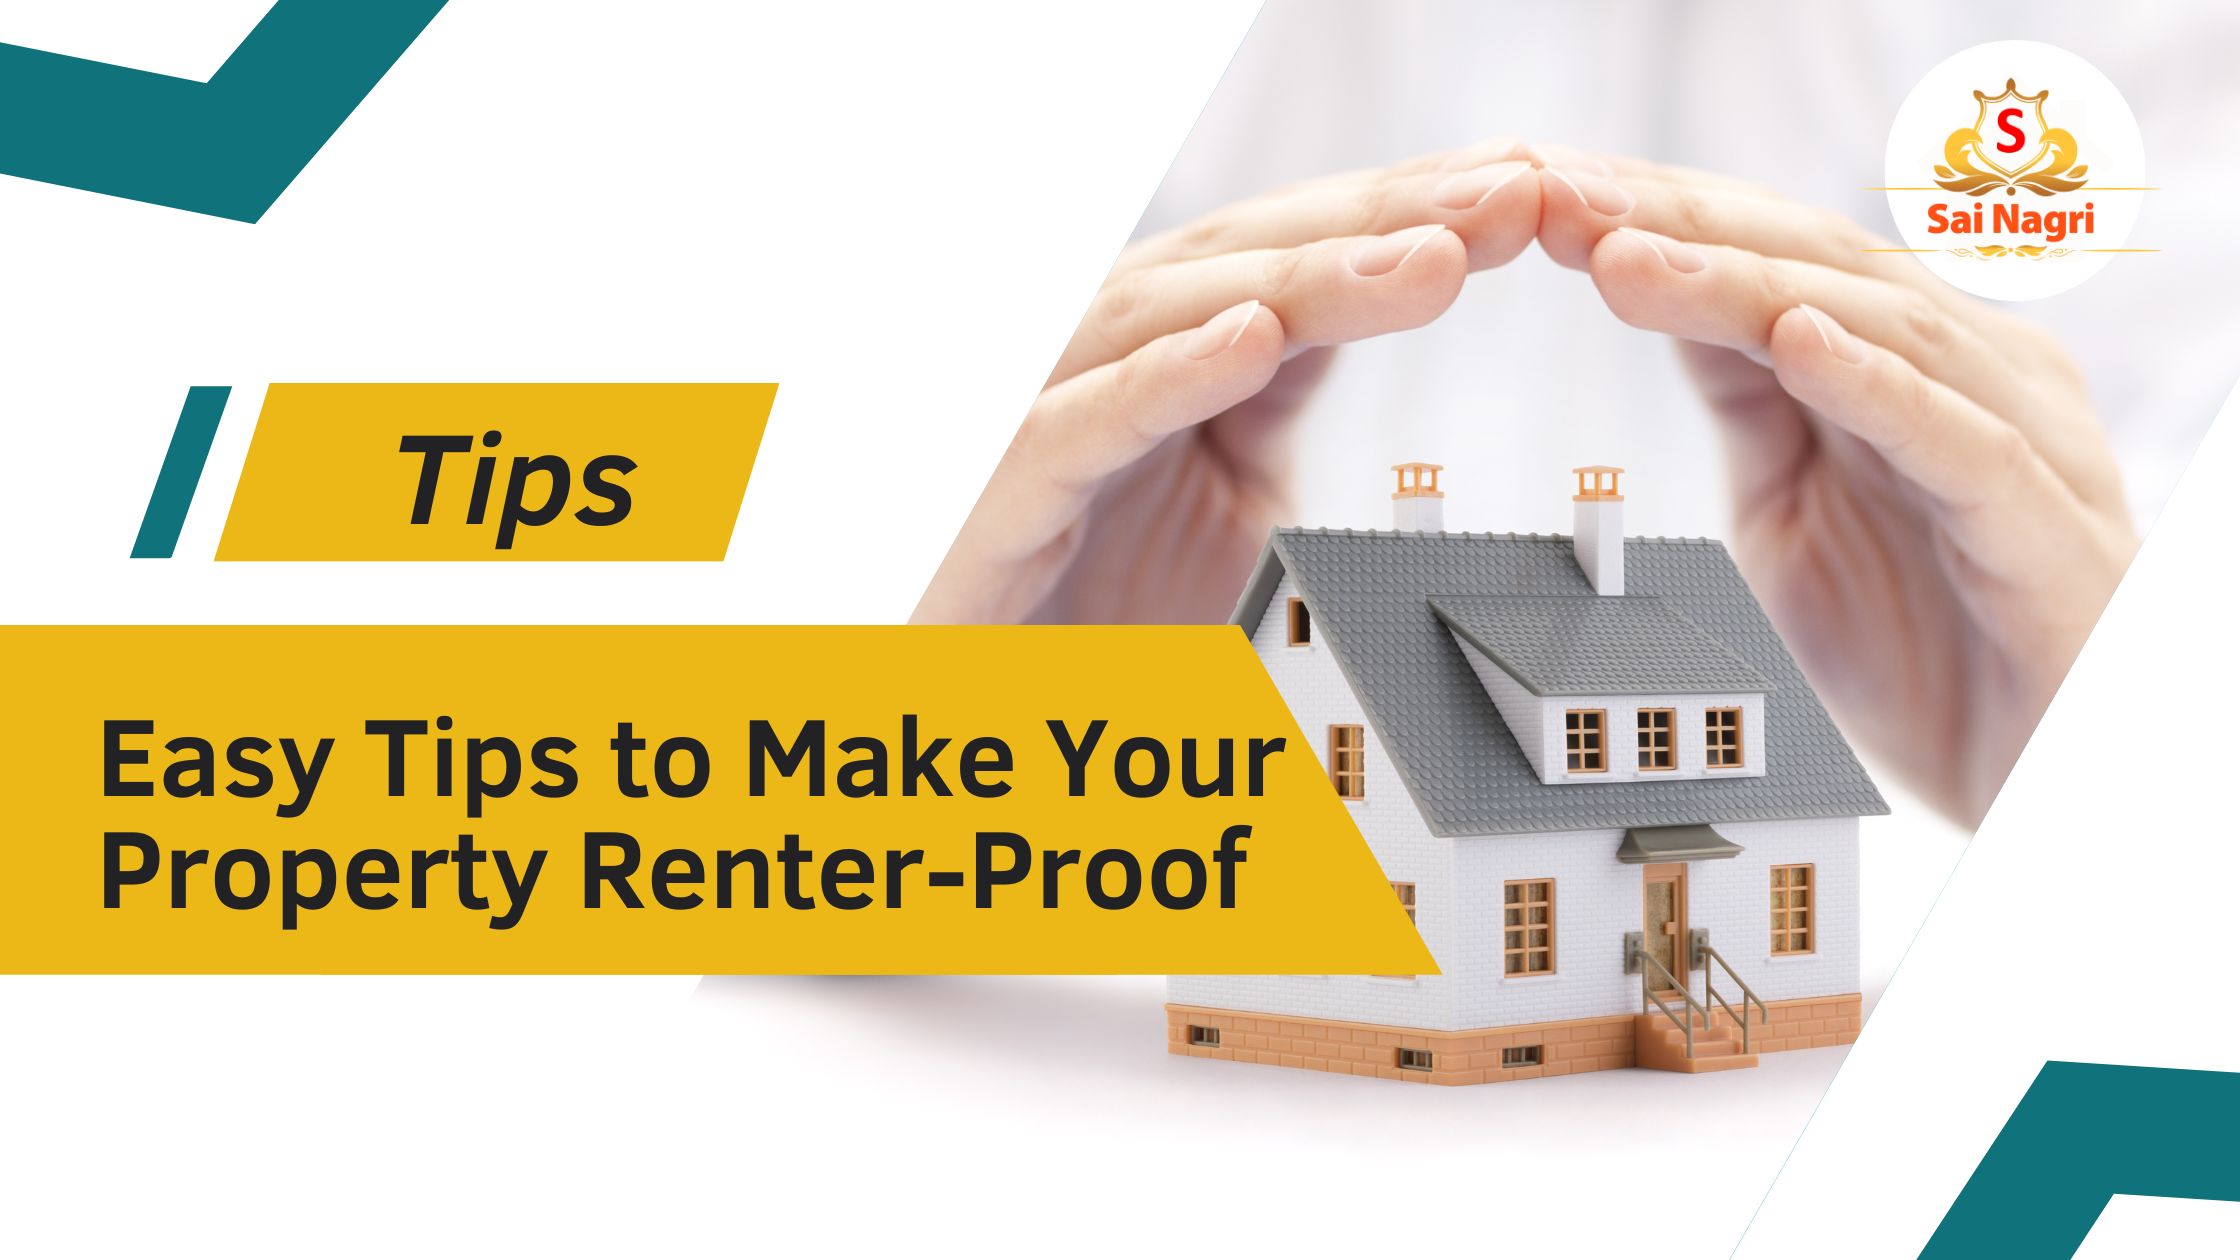  Easy Tips to Make Your Property Renter-Proof